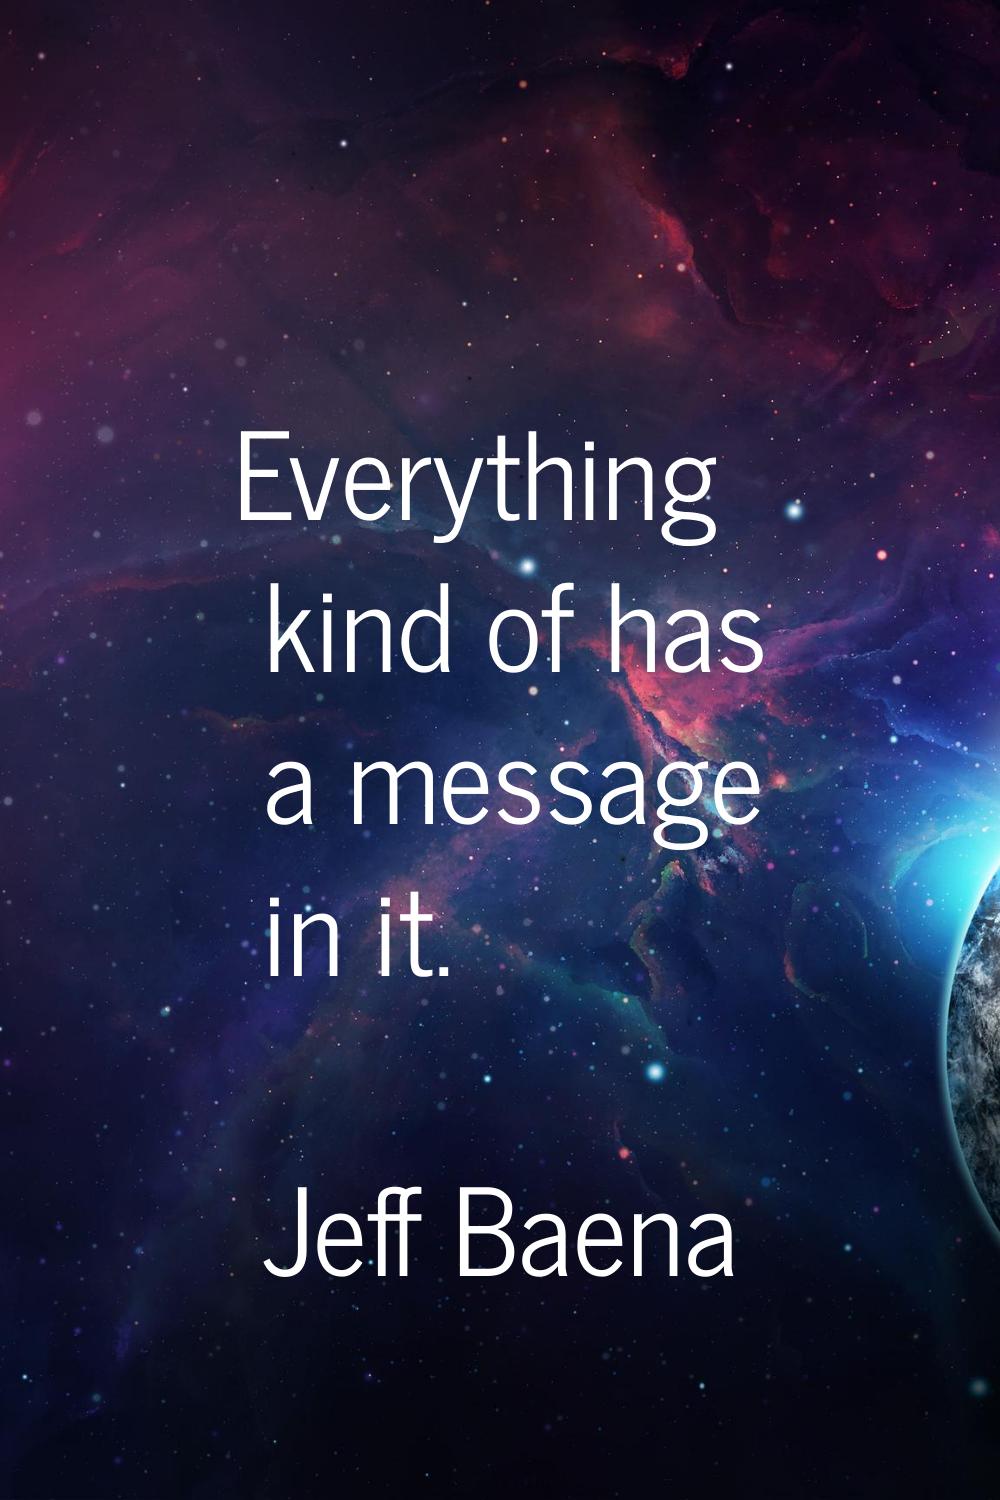 Everything kind of has a message in it.